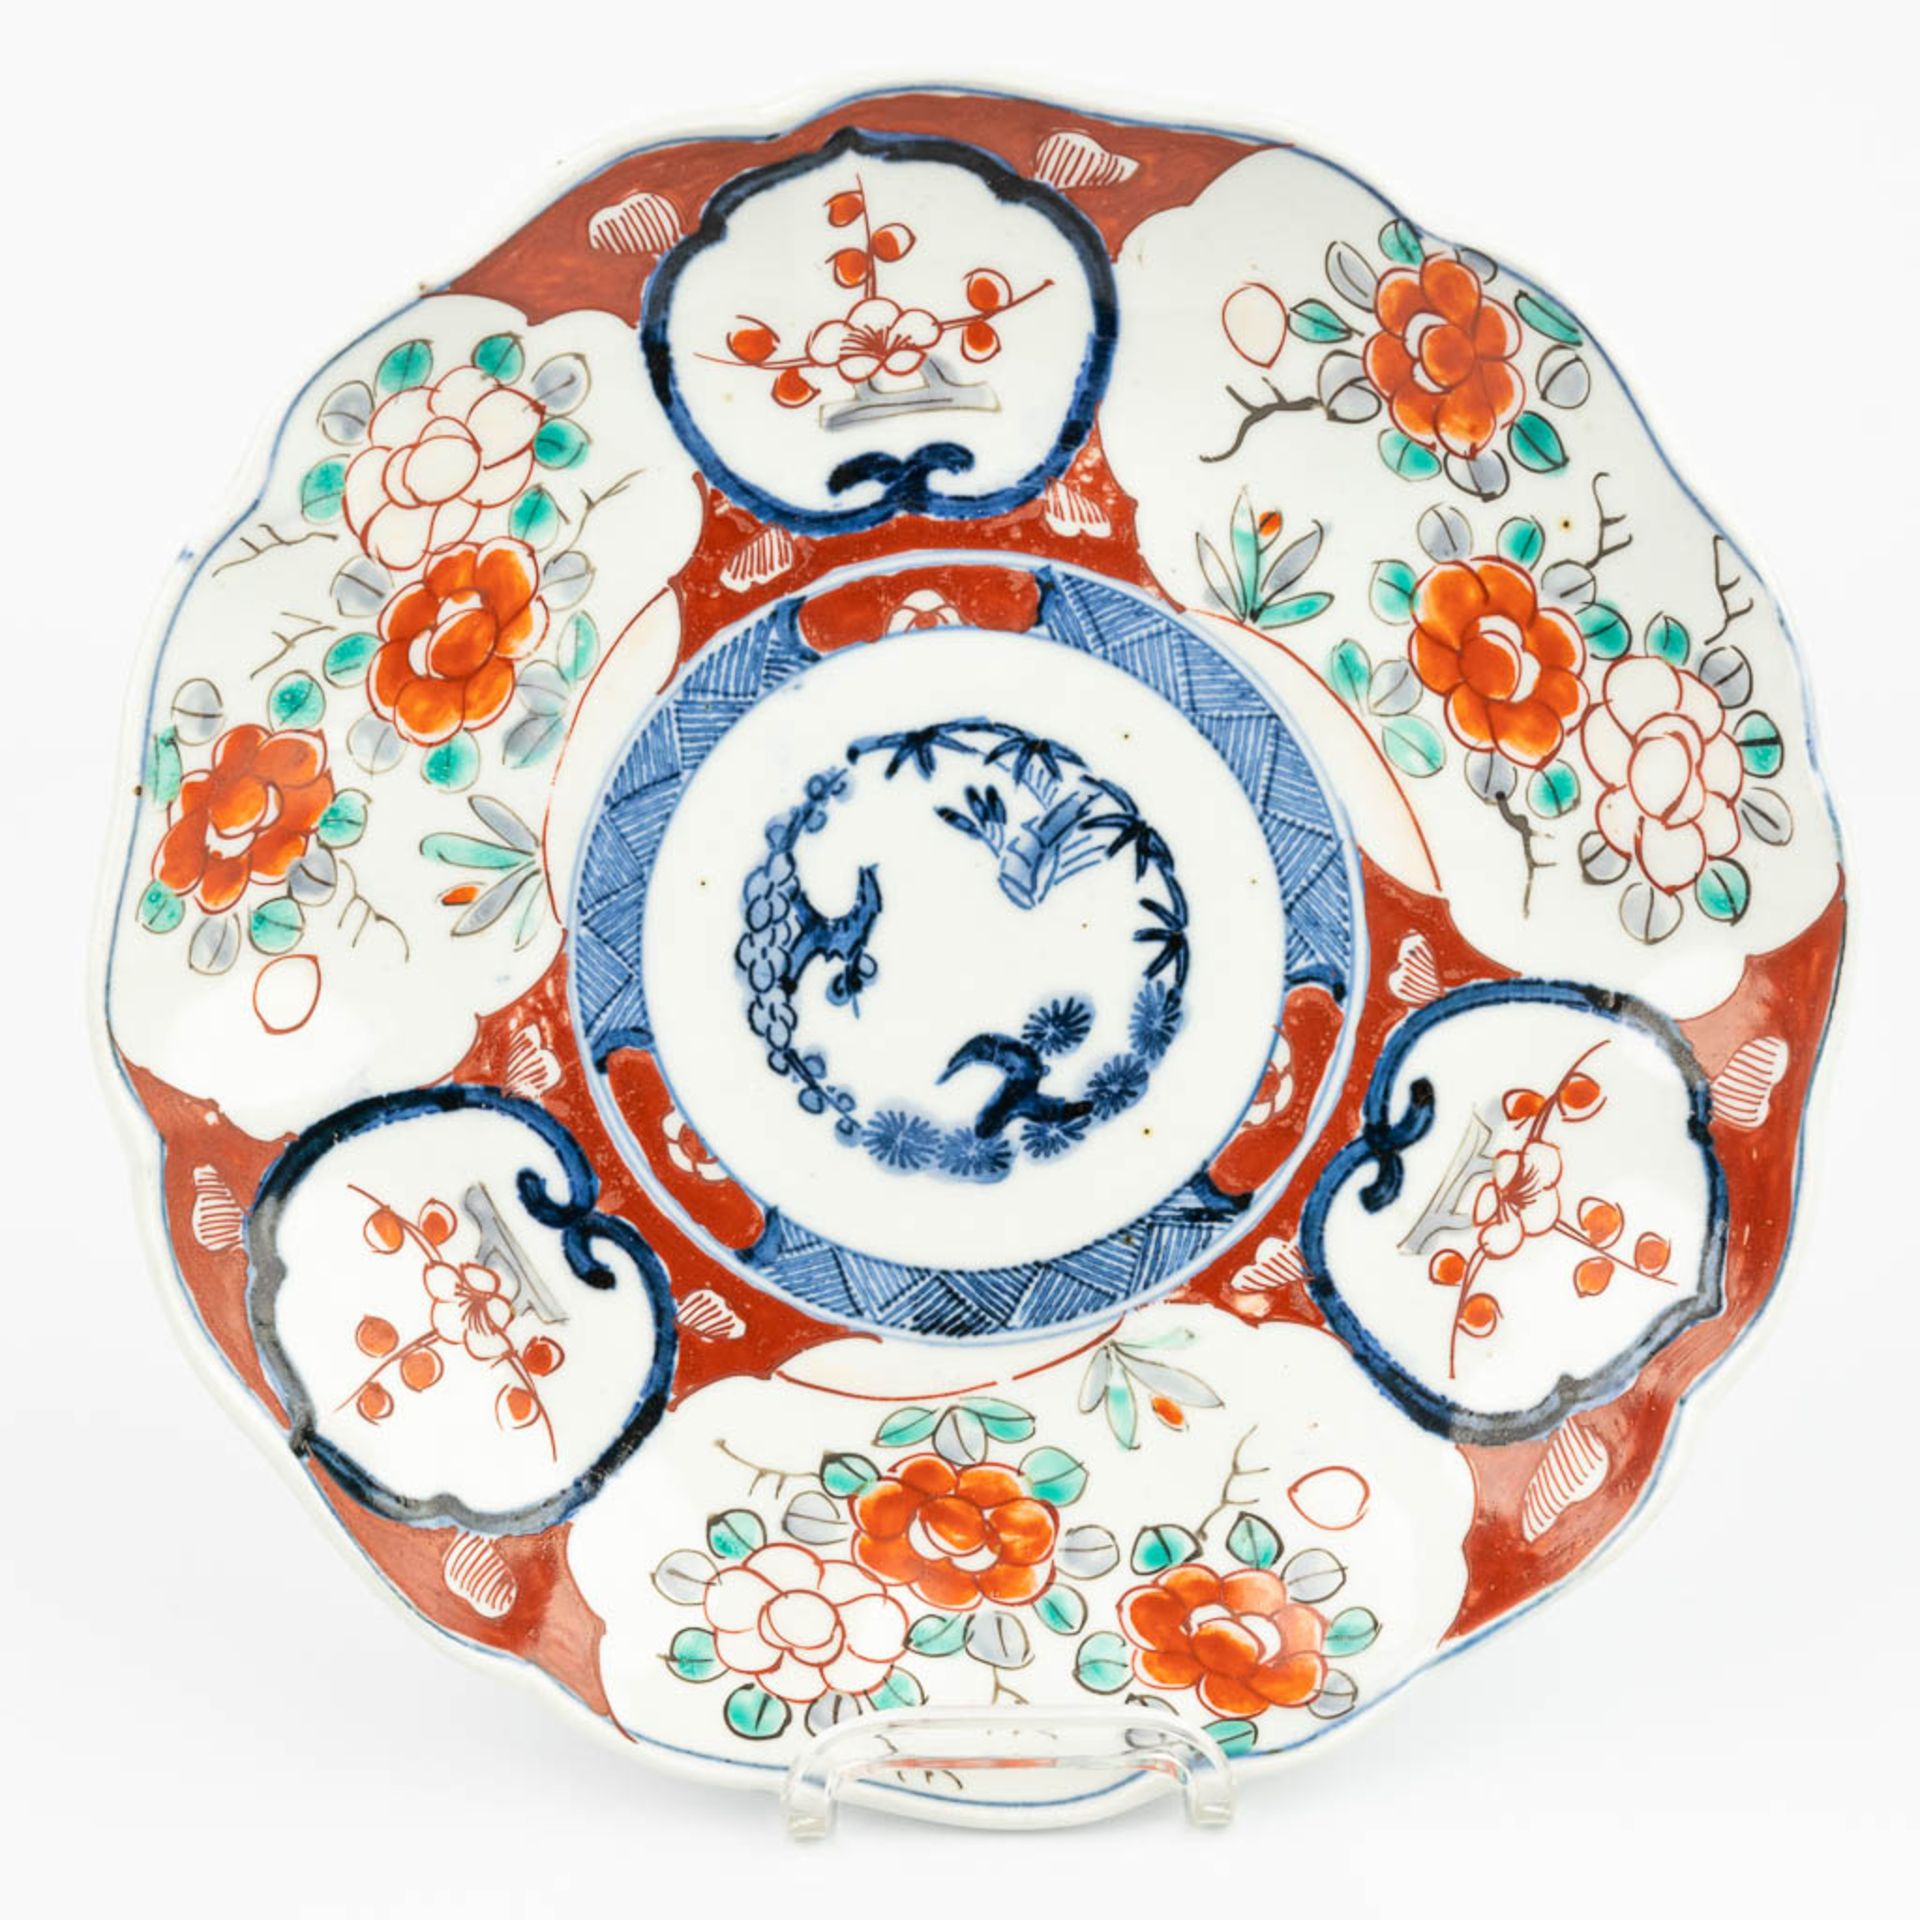 A collection of 7 Chinese and Japanese plates made of porcelain, Imari. - Image 11 of 13